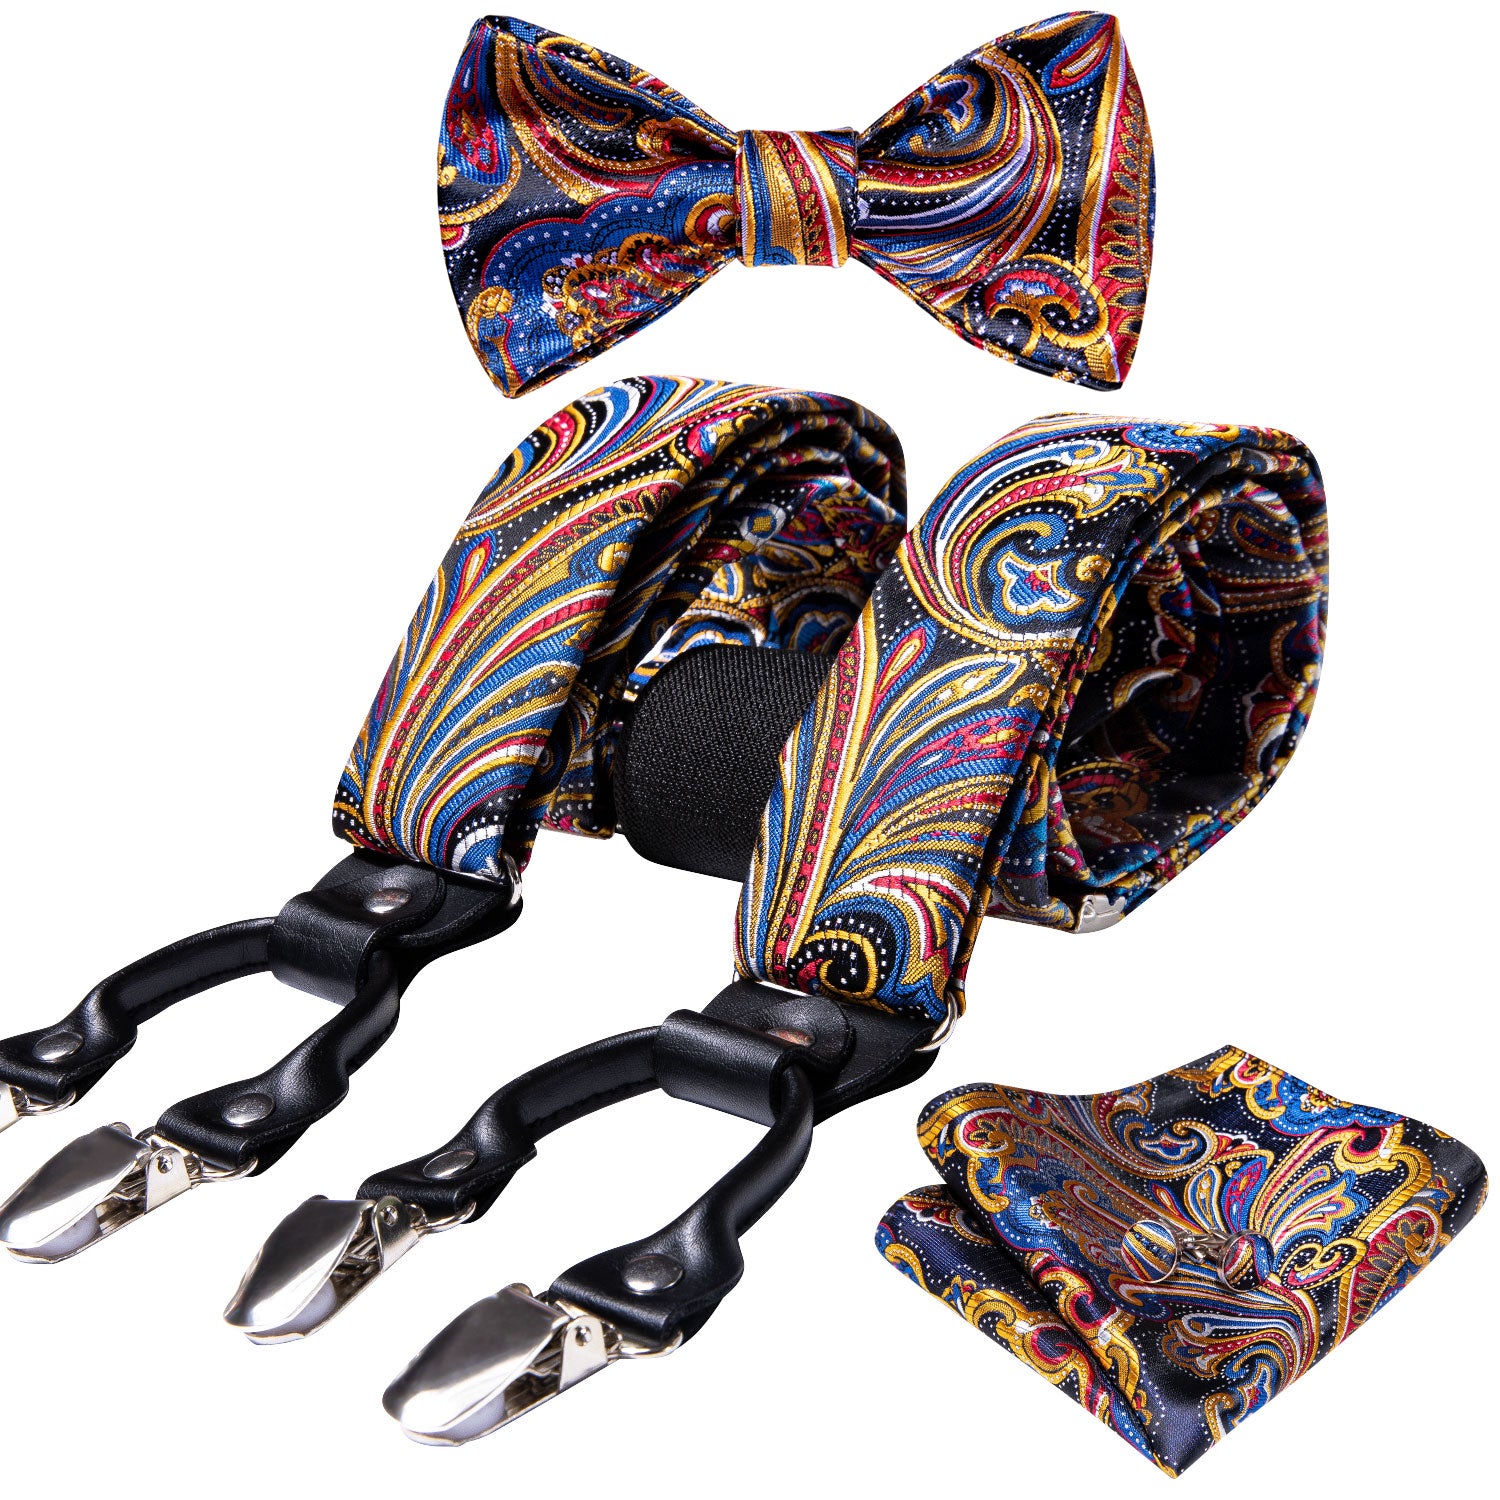 Barry.wang Gold Tie Blue Paisley Y Back Adjustable Suspenders Bow Tie Set for Men